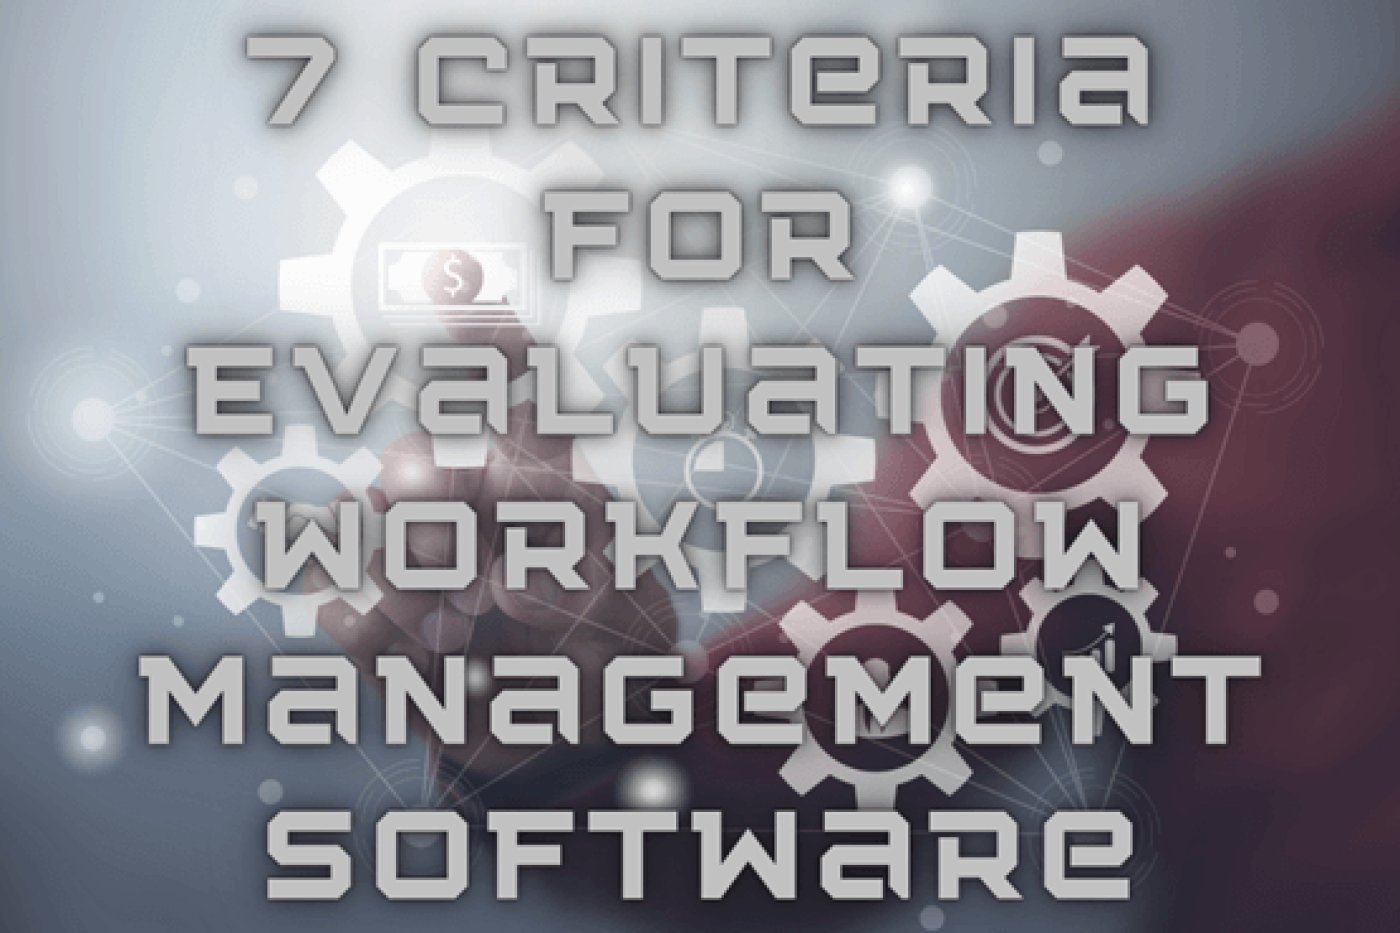 7 Criteria for Evaluating Workflow Management Software